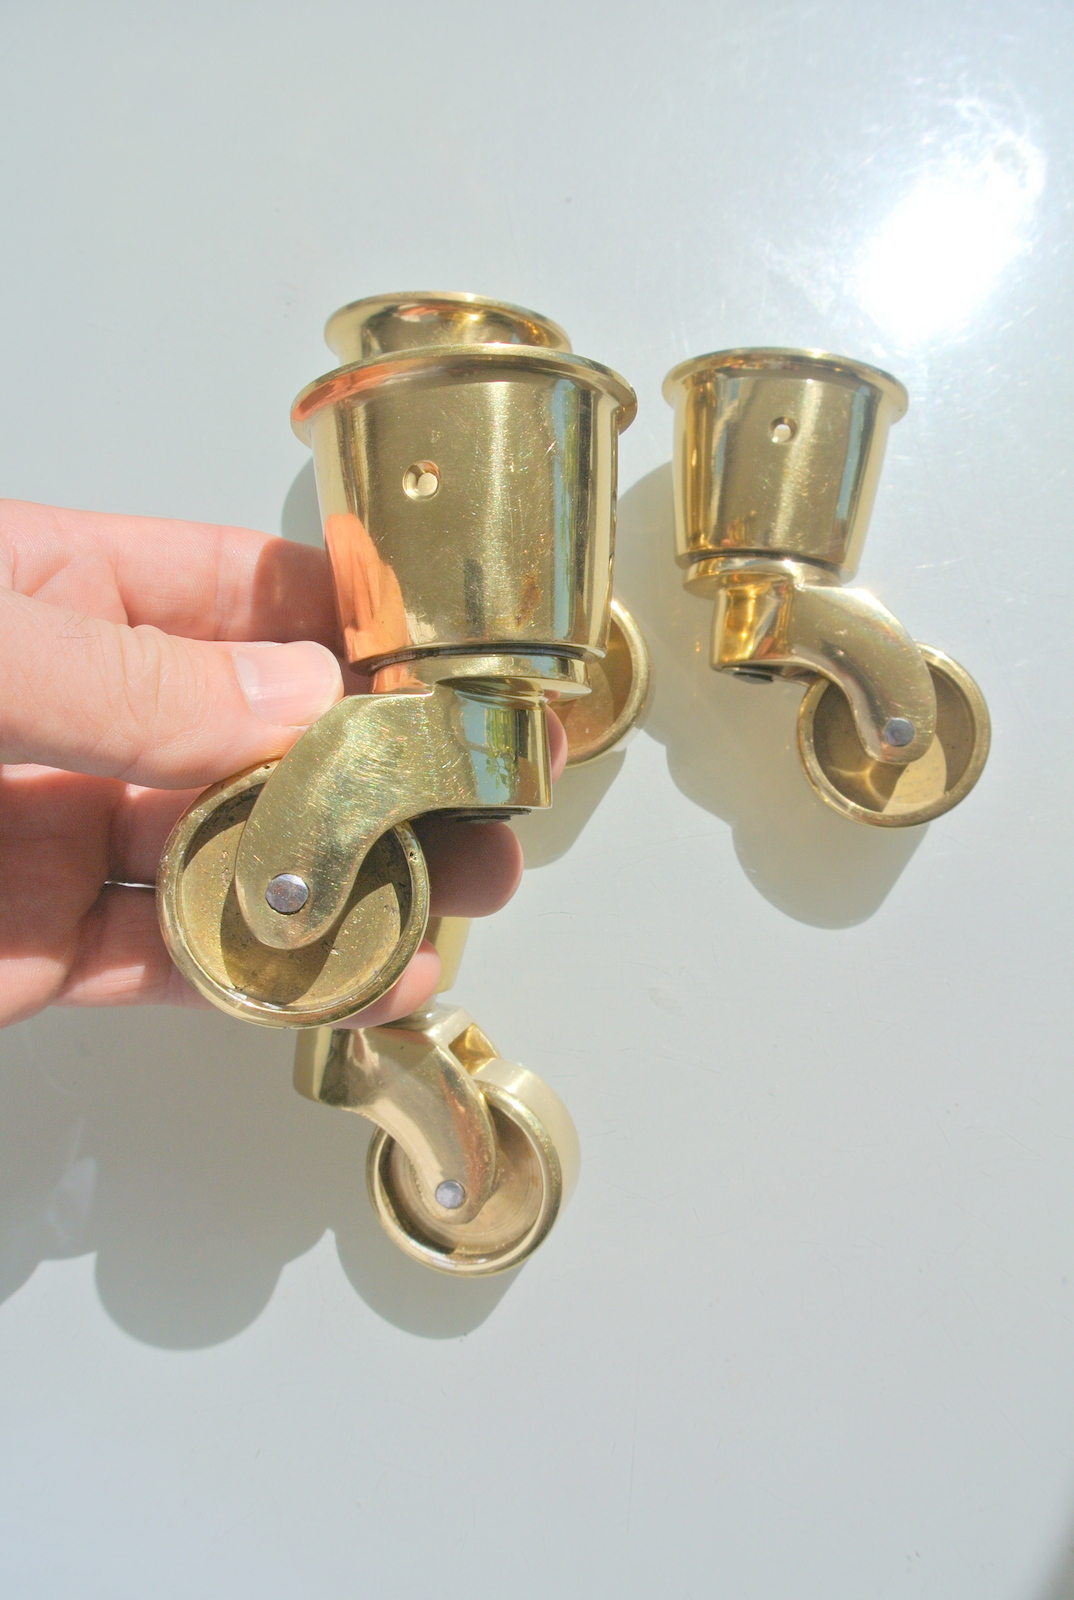 4 large CUP solid Brass foot castors wheel chairs table old style castor 3.1/2"B 